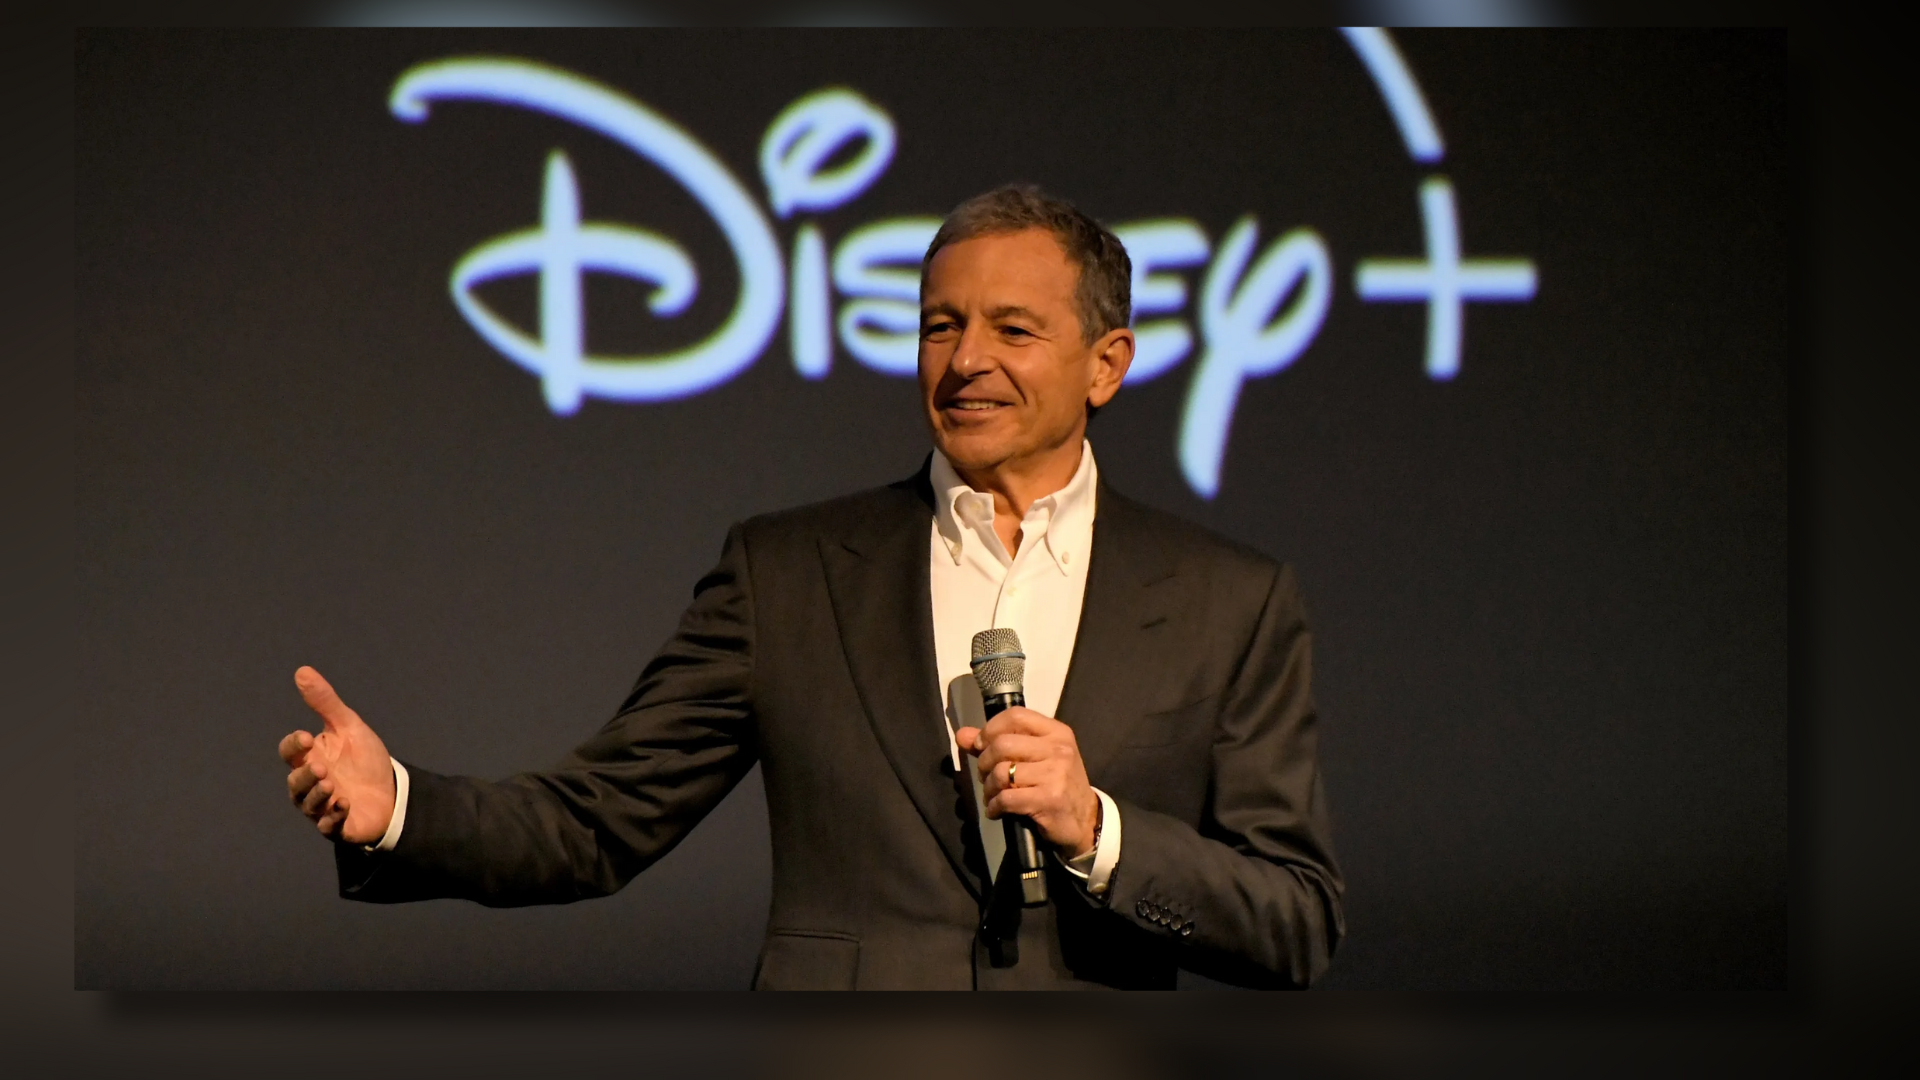 Disney And CEO Bob Iger Emerged Victorious In Battle Against Activist Investors For Board Seats